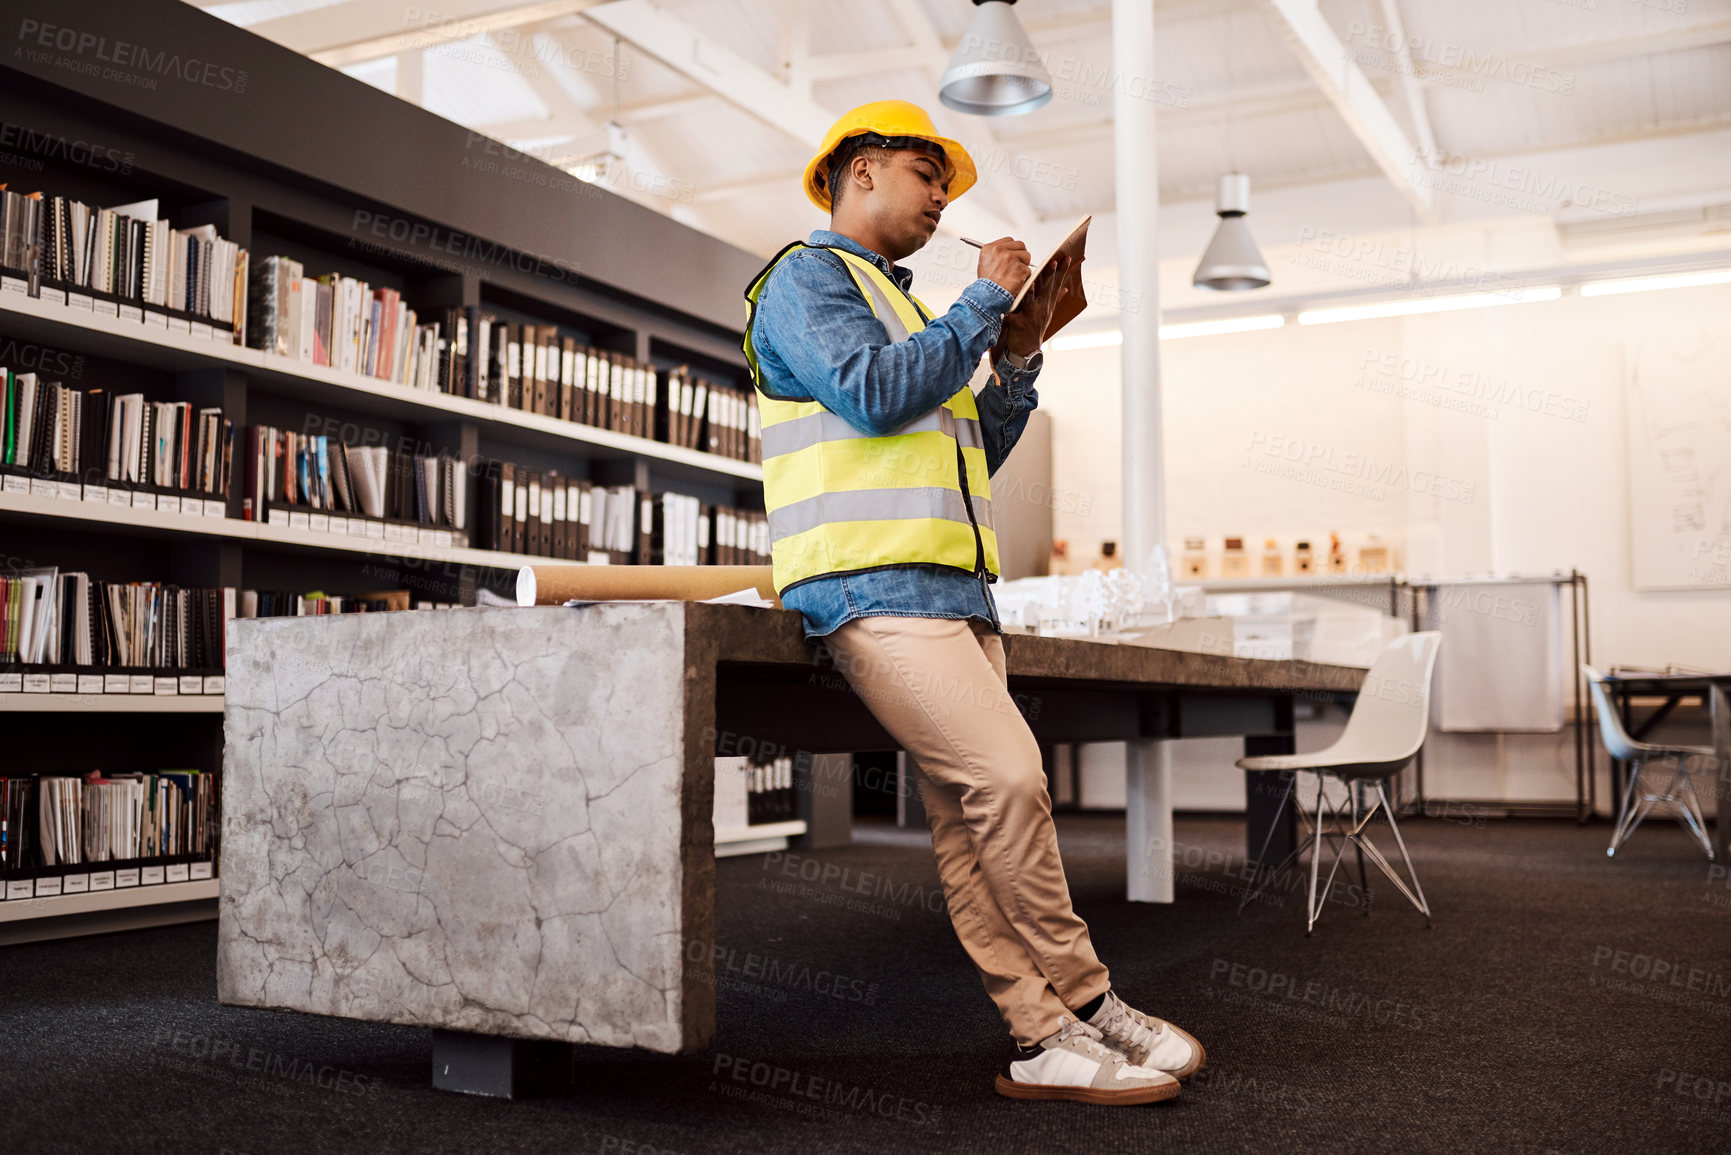 Buy stock photo Shot of an architect making notes while standing in his office